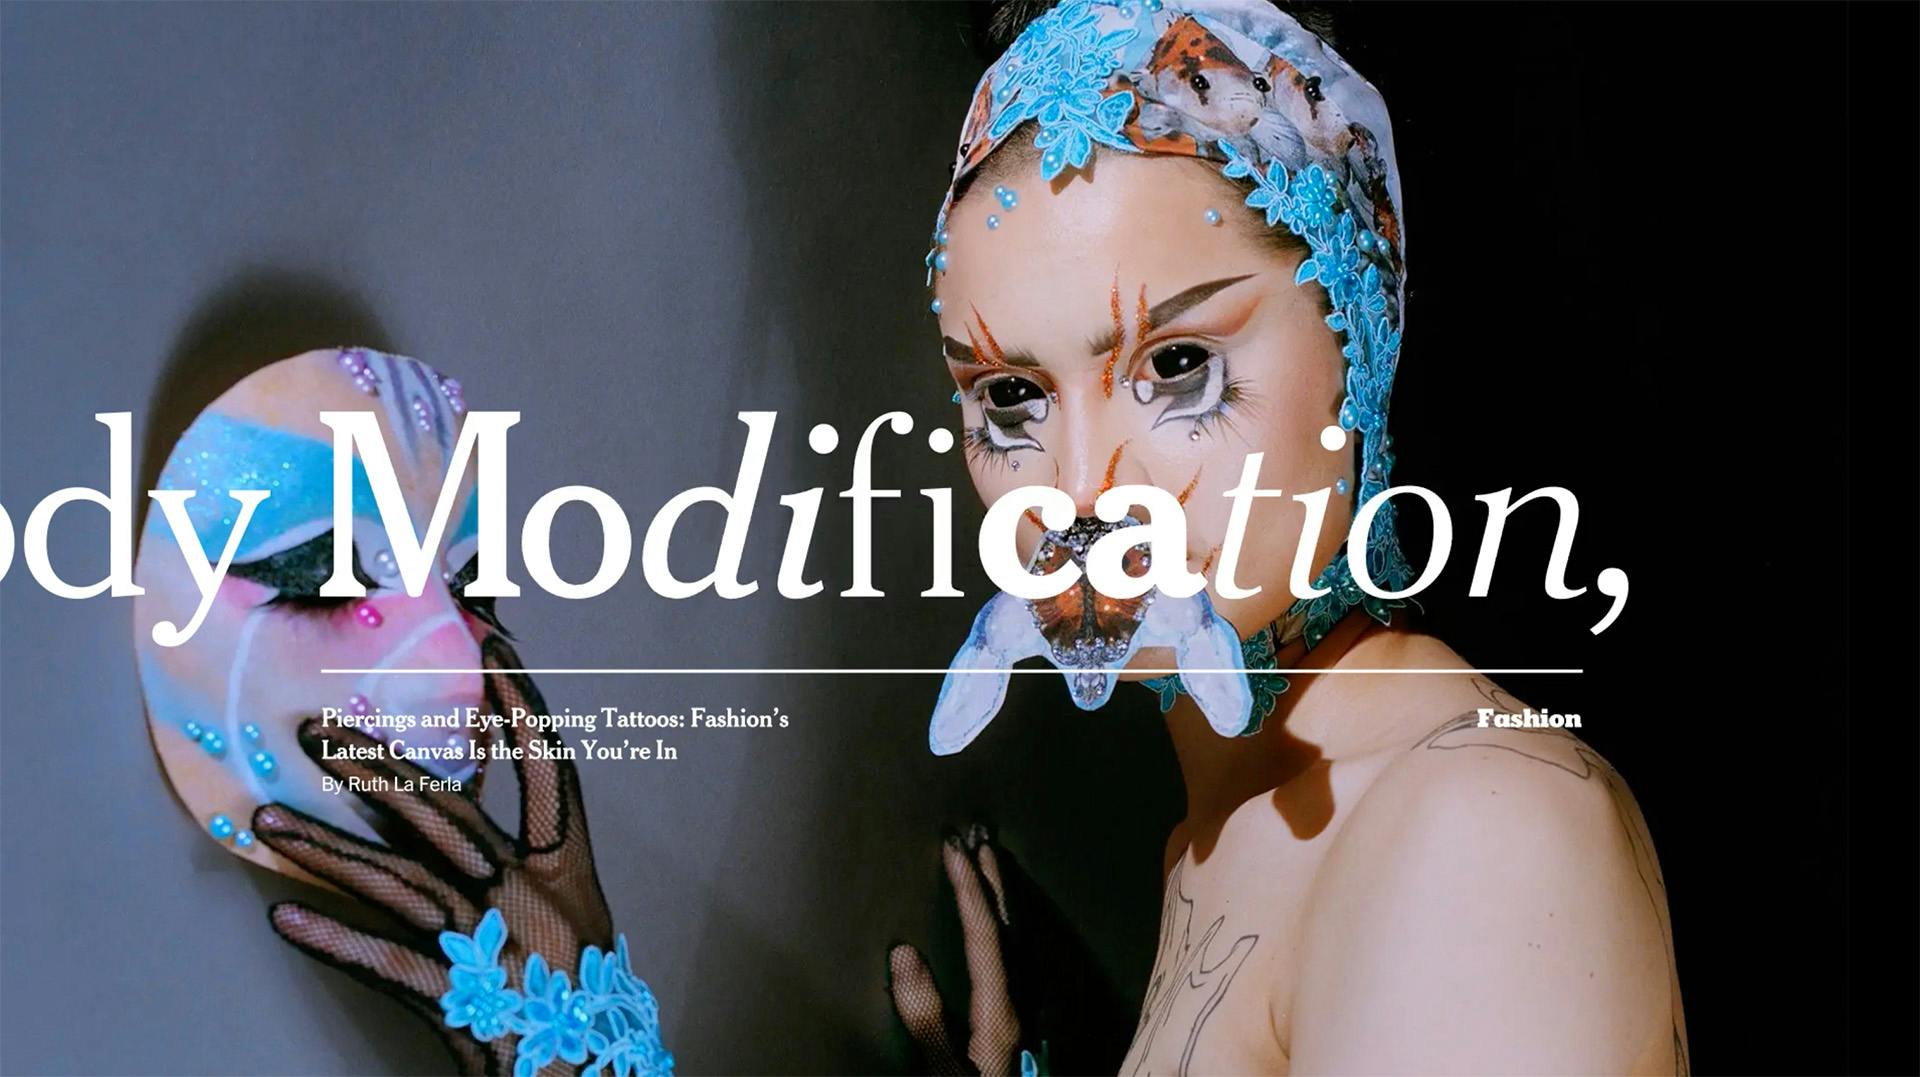 Still image from a New York Times brand campaign film showing an image of a pperson with ornate tattoos, decorated head cap, and fantastical facial accessories, holding an elaborate mask to the wall, with the words 'Modification' layered over the photo